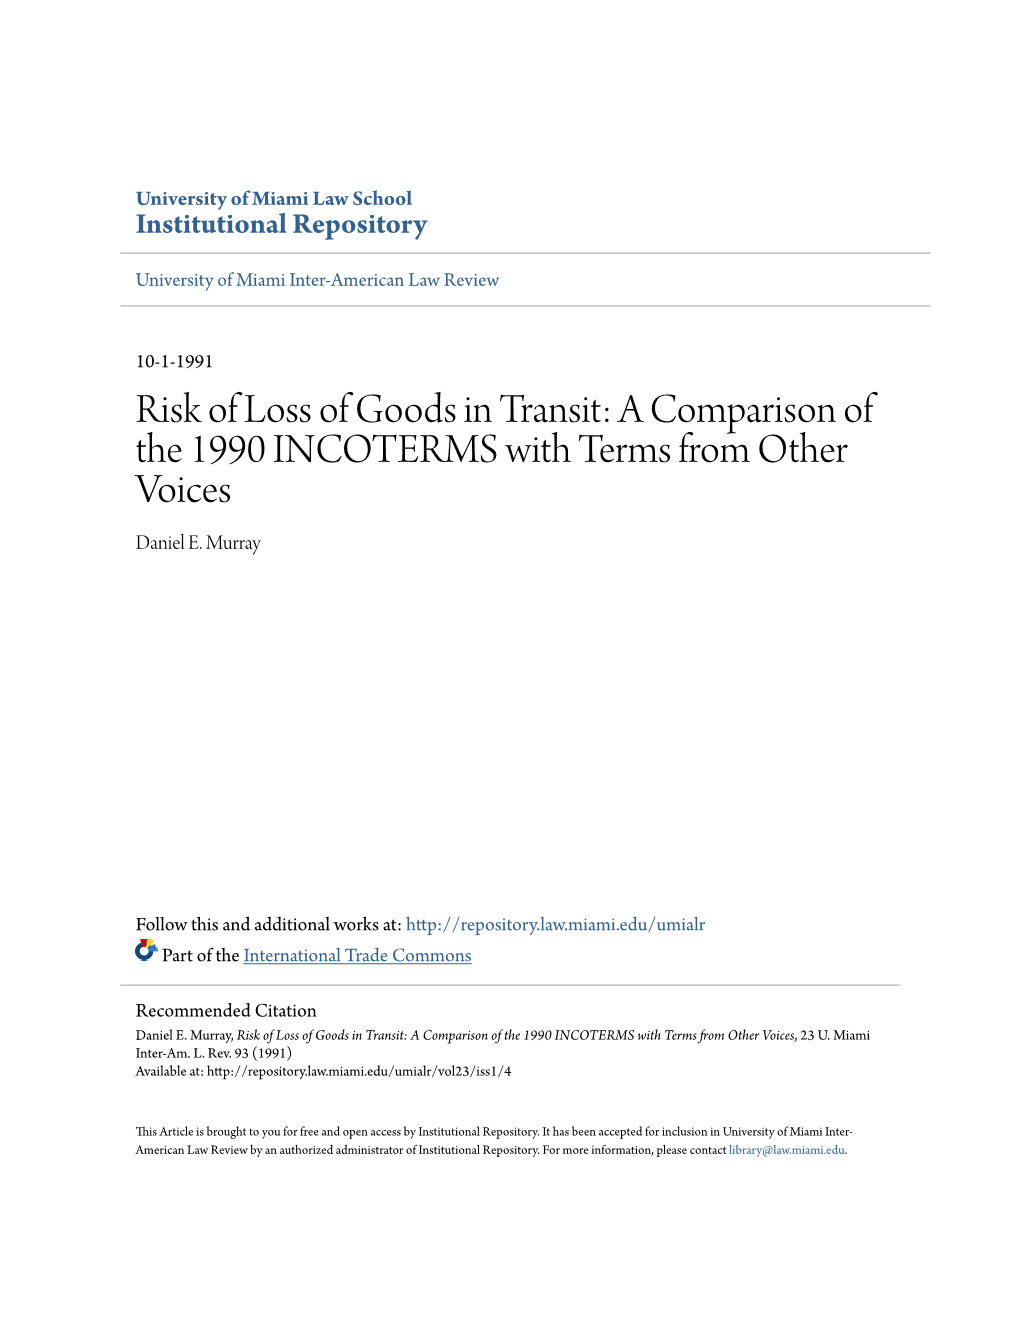 Risk of Loss of Goods in Transit: a Comparison of the 1990 INCOTERMS with Terms from Other Voices Daniel E